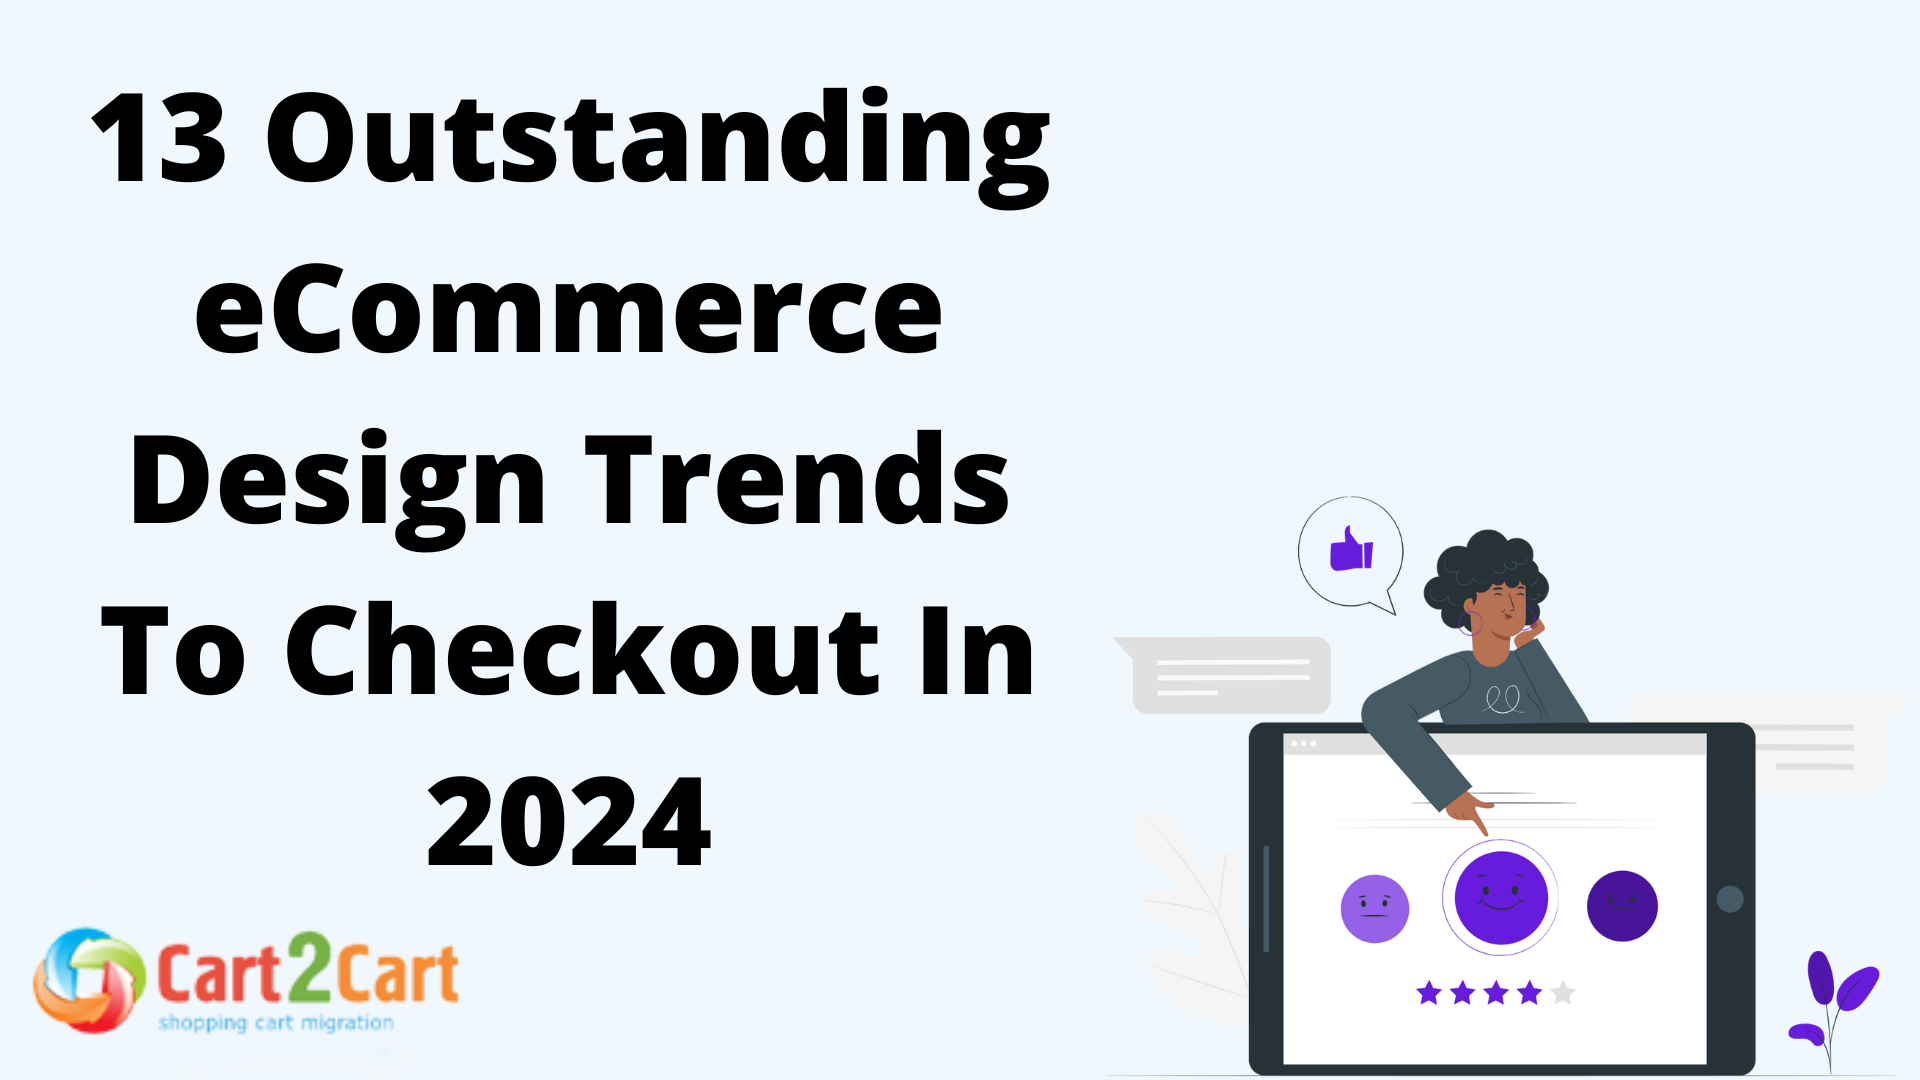 13 Innovative Ecommerce Design Trends to Check Out in 2024
